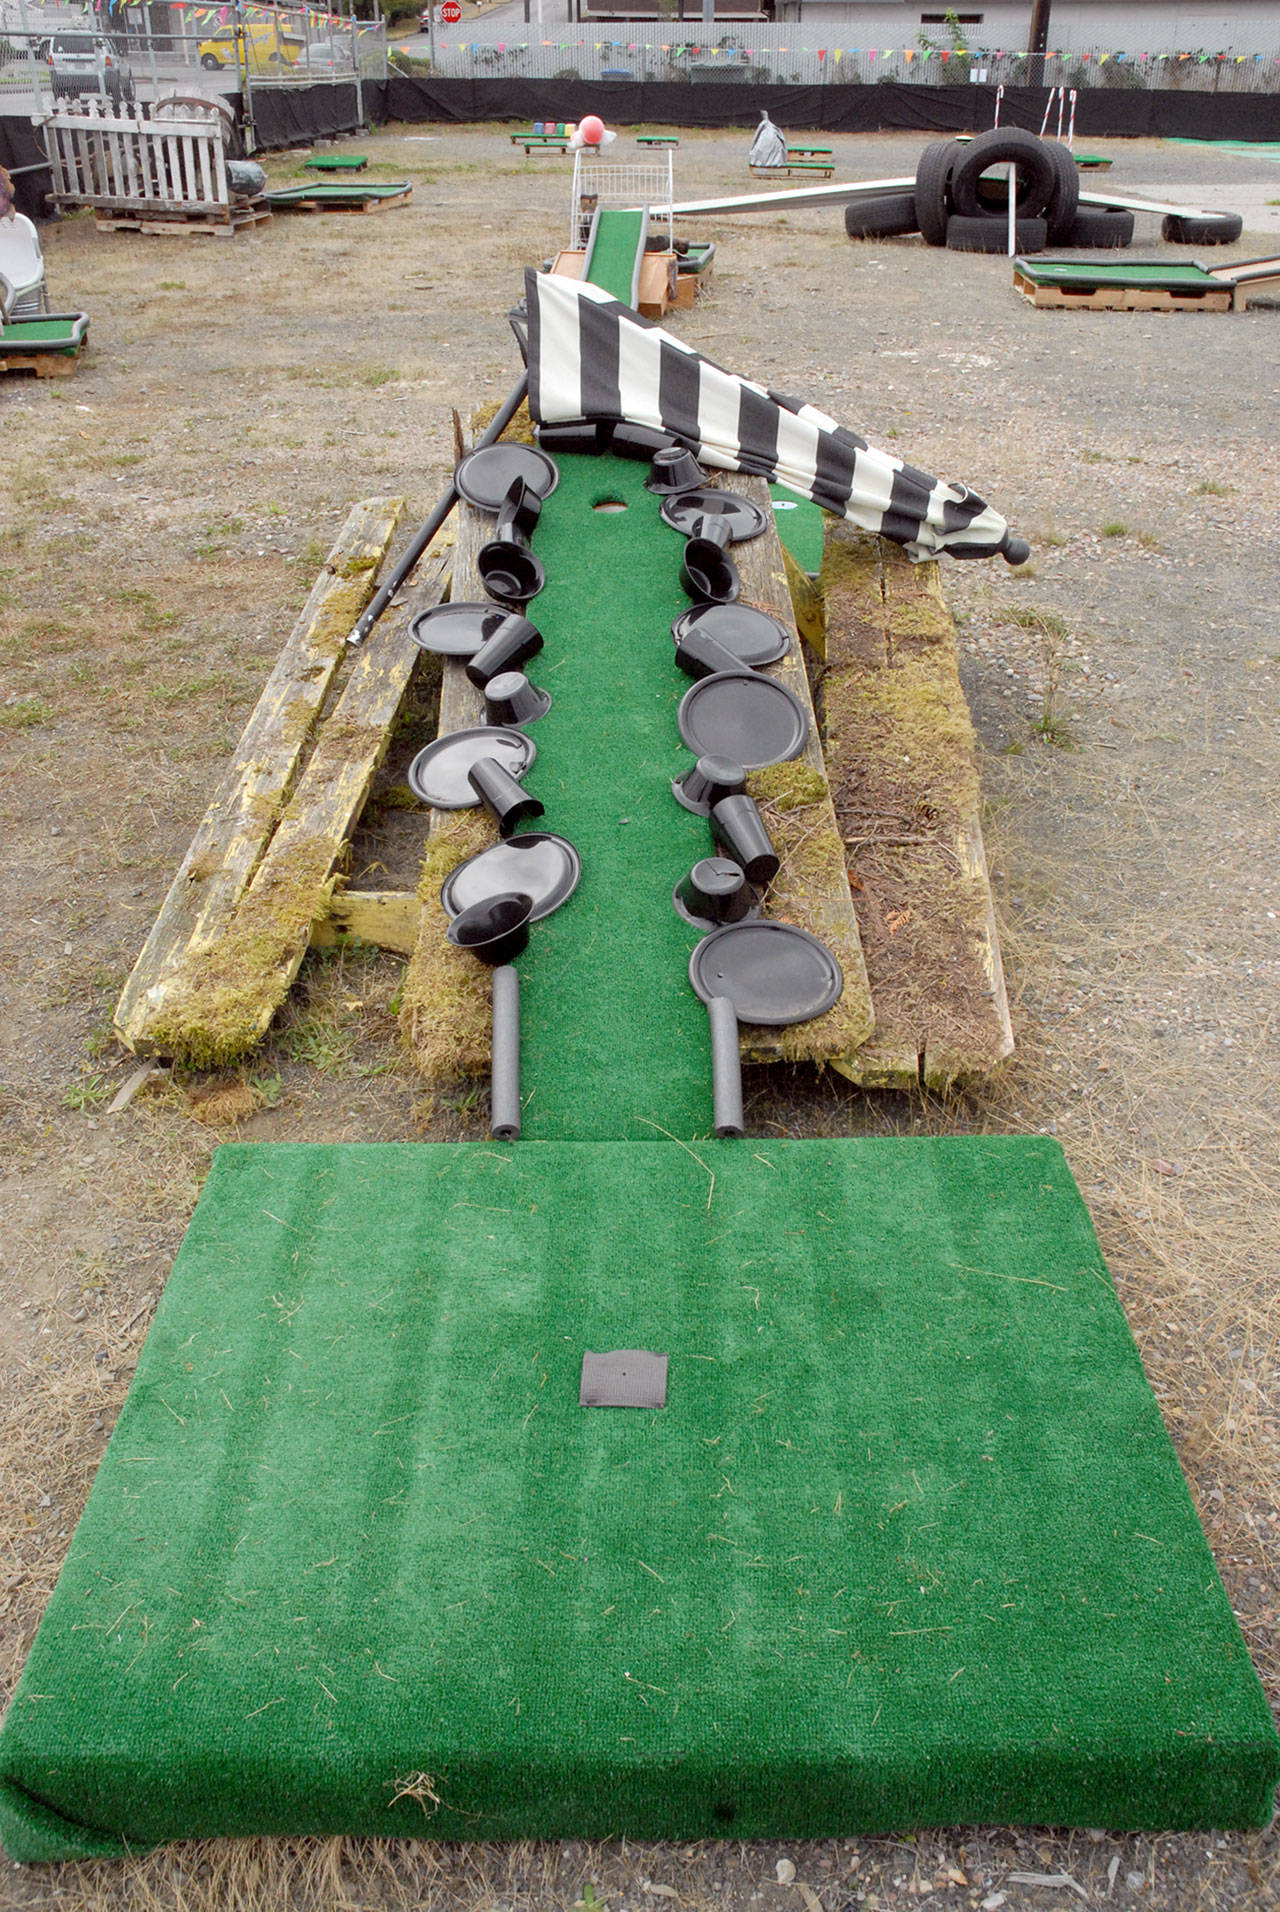 Plastic plates and cups and an old picnic table make up a miniature golf hole at OMG Olympic Miniature Golf in Port Angeles. (Keith Thorpe/Peninsula Daily News)